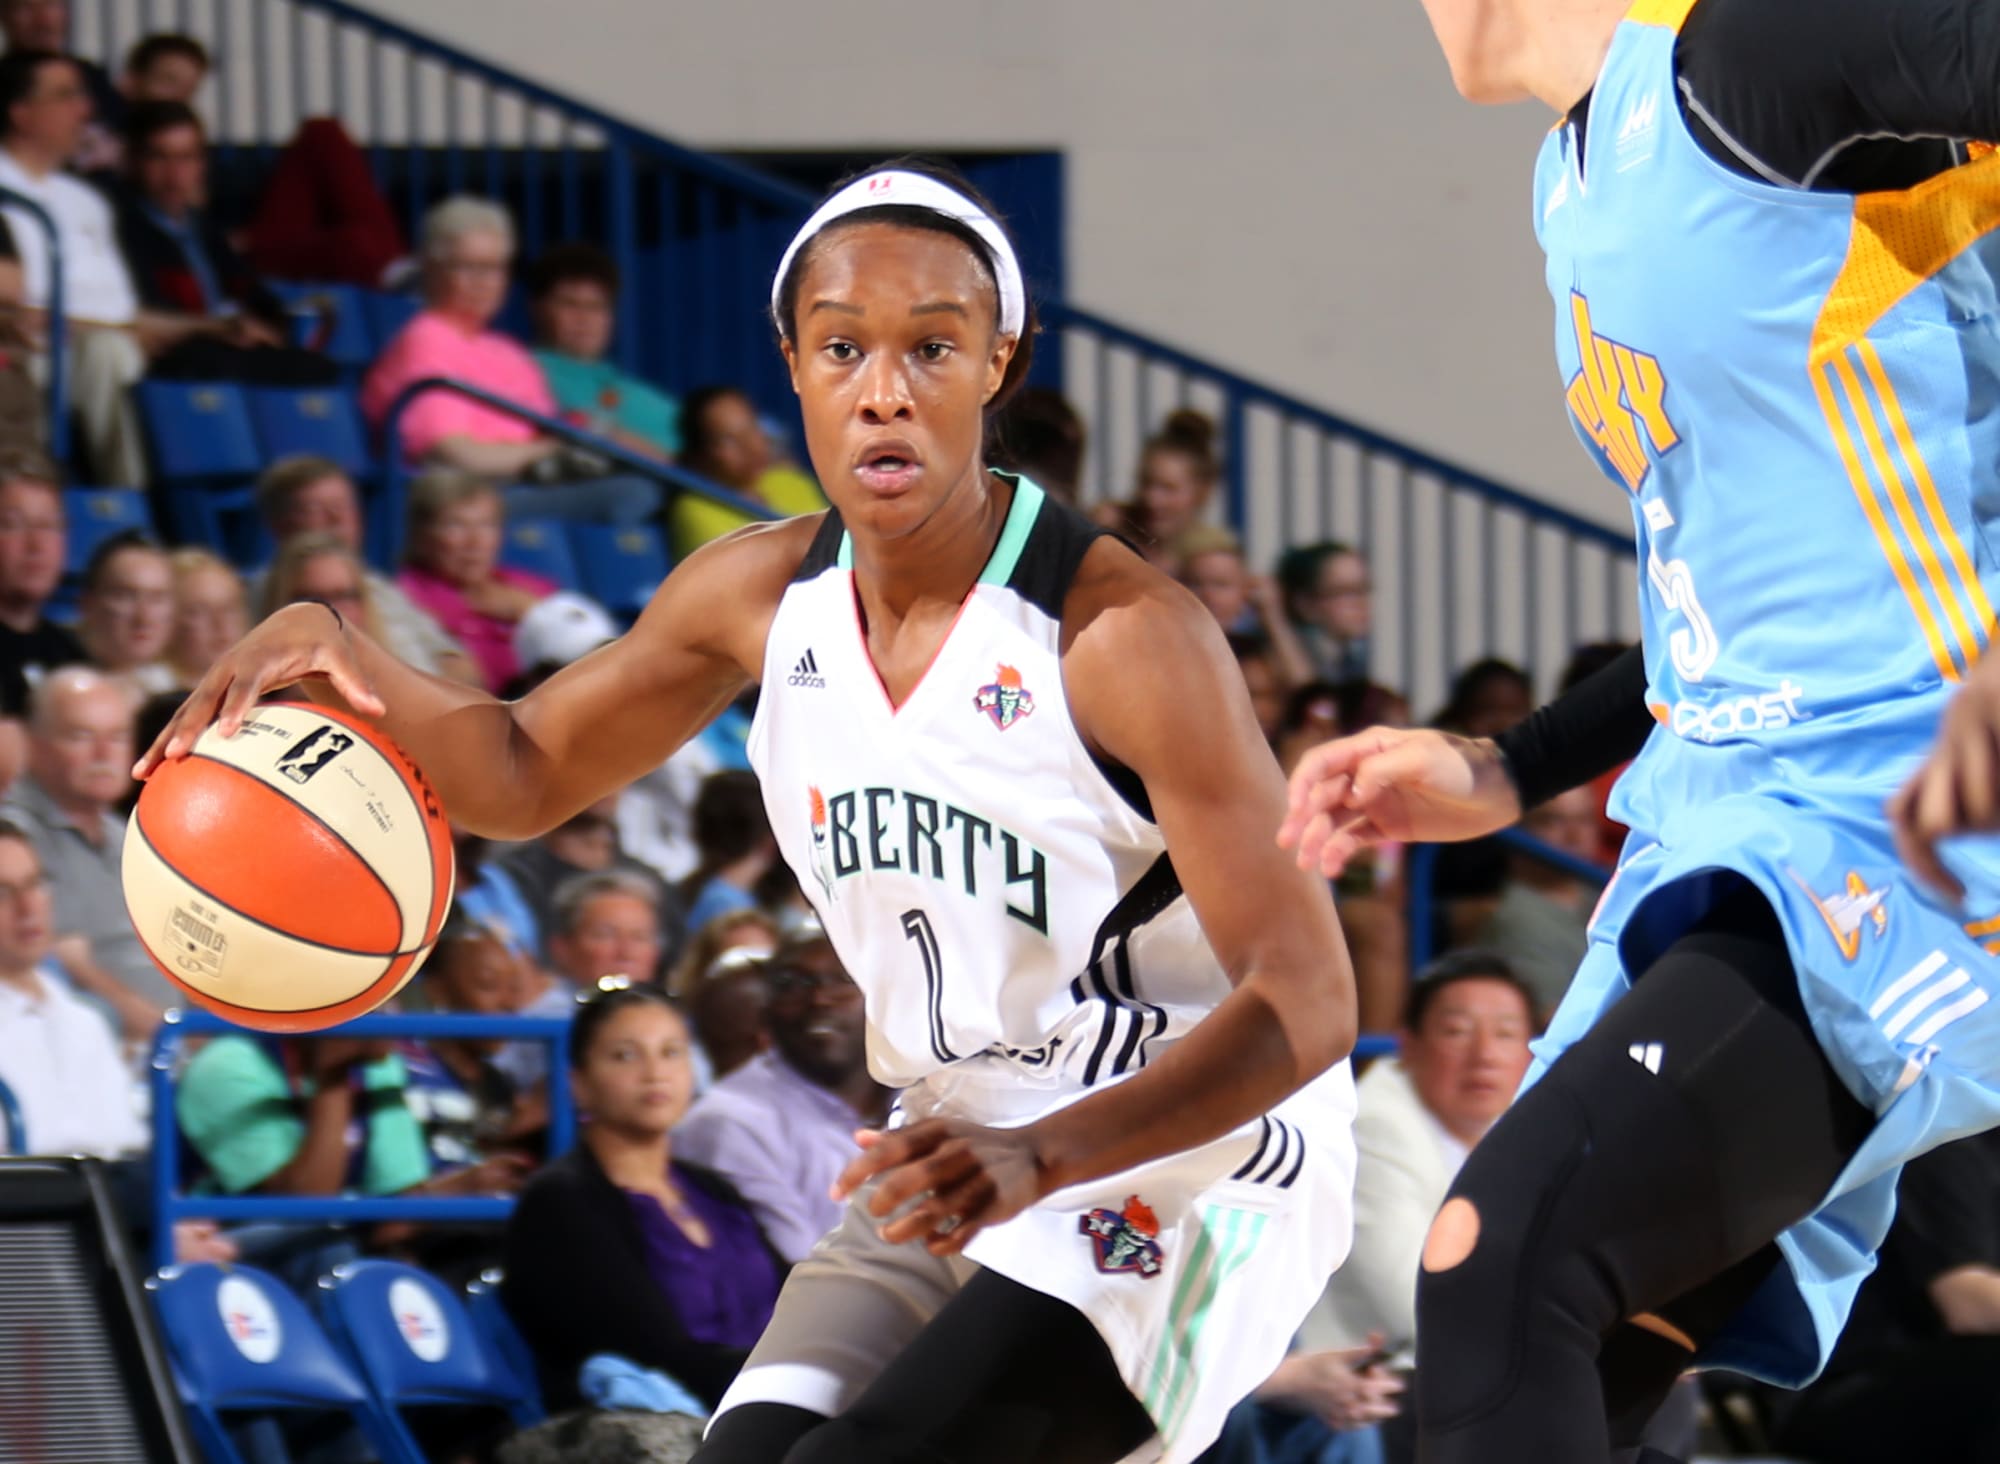 Guard Chelsea Hopkins signs with New York Liberty